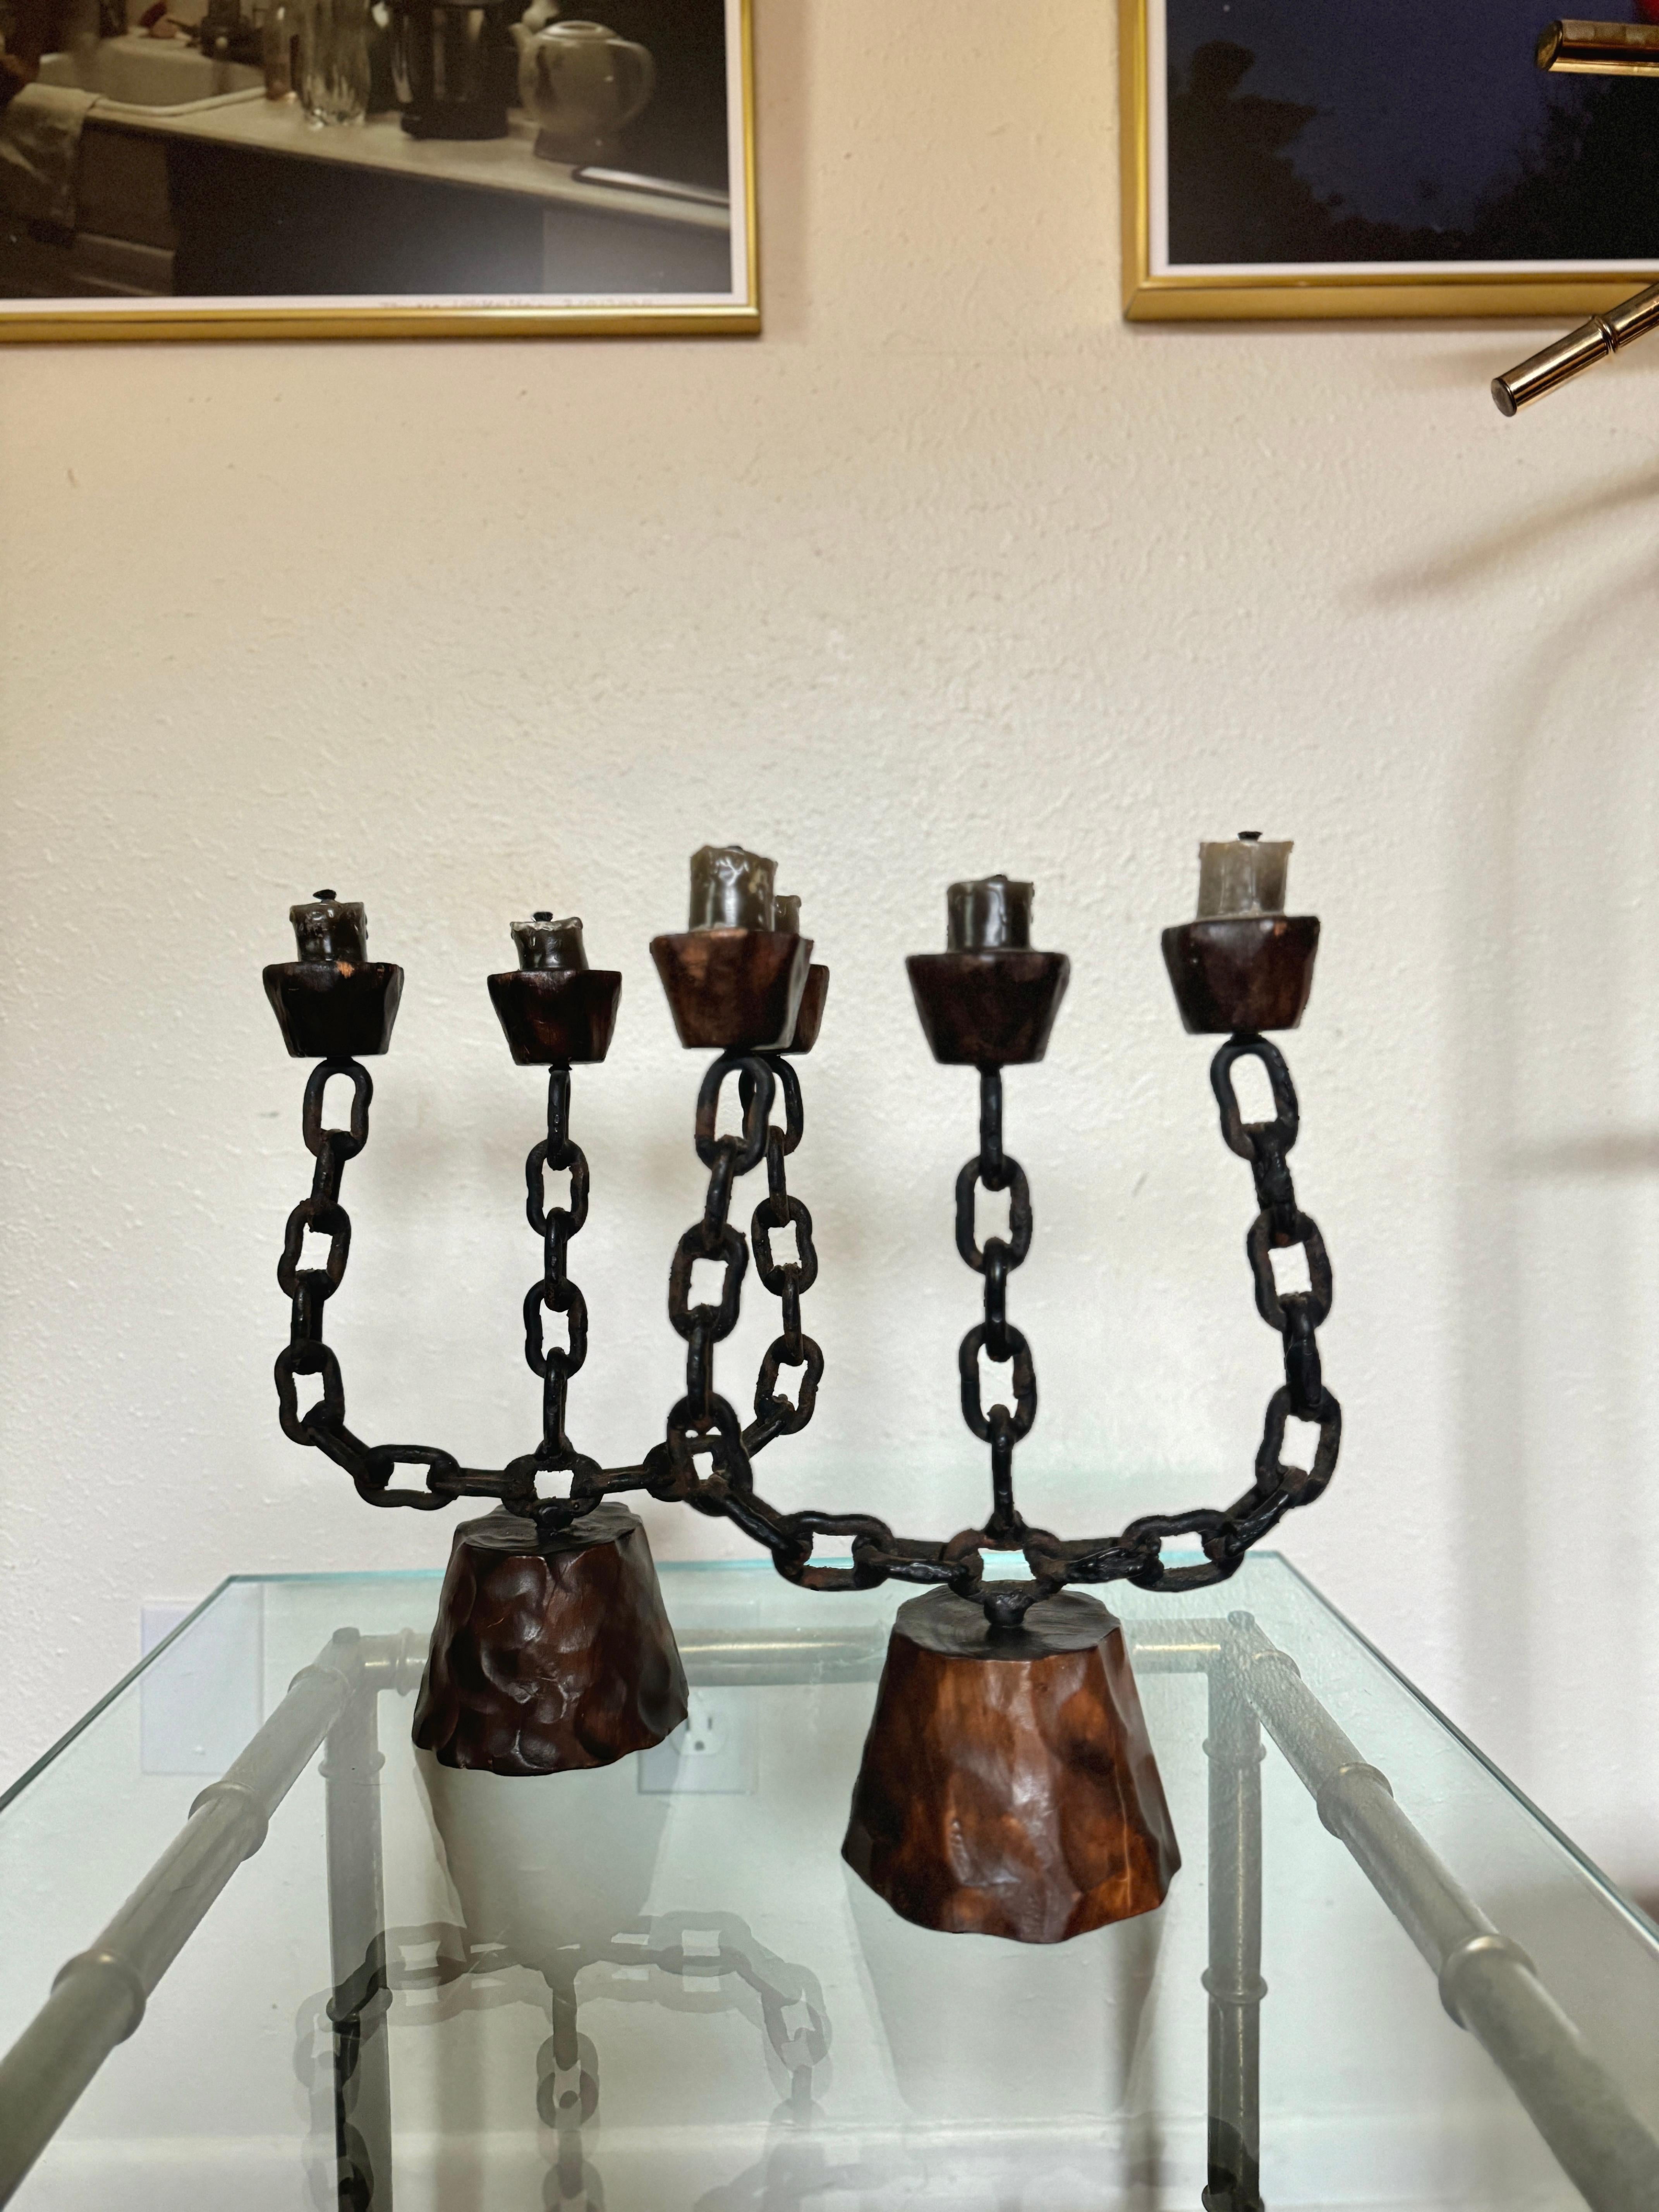 A pair of Spanish brutalist candelabras, circa 1950s.
In good condition. 
13” H x 9” W
